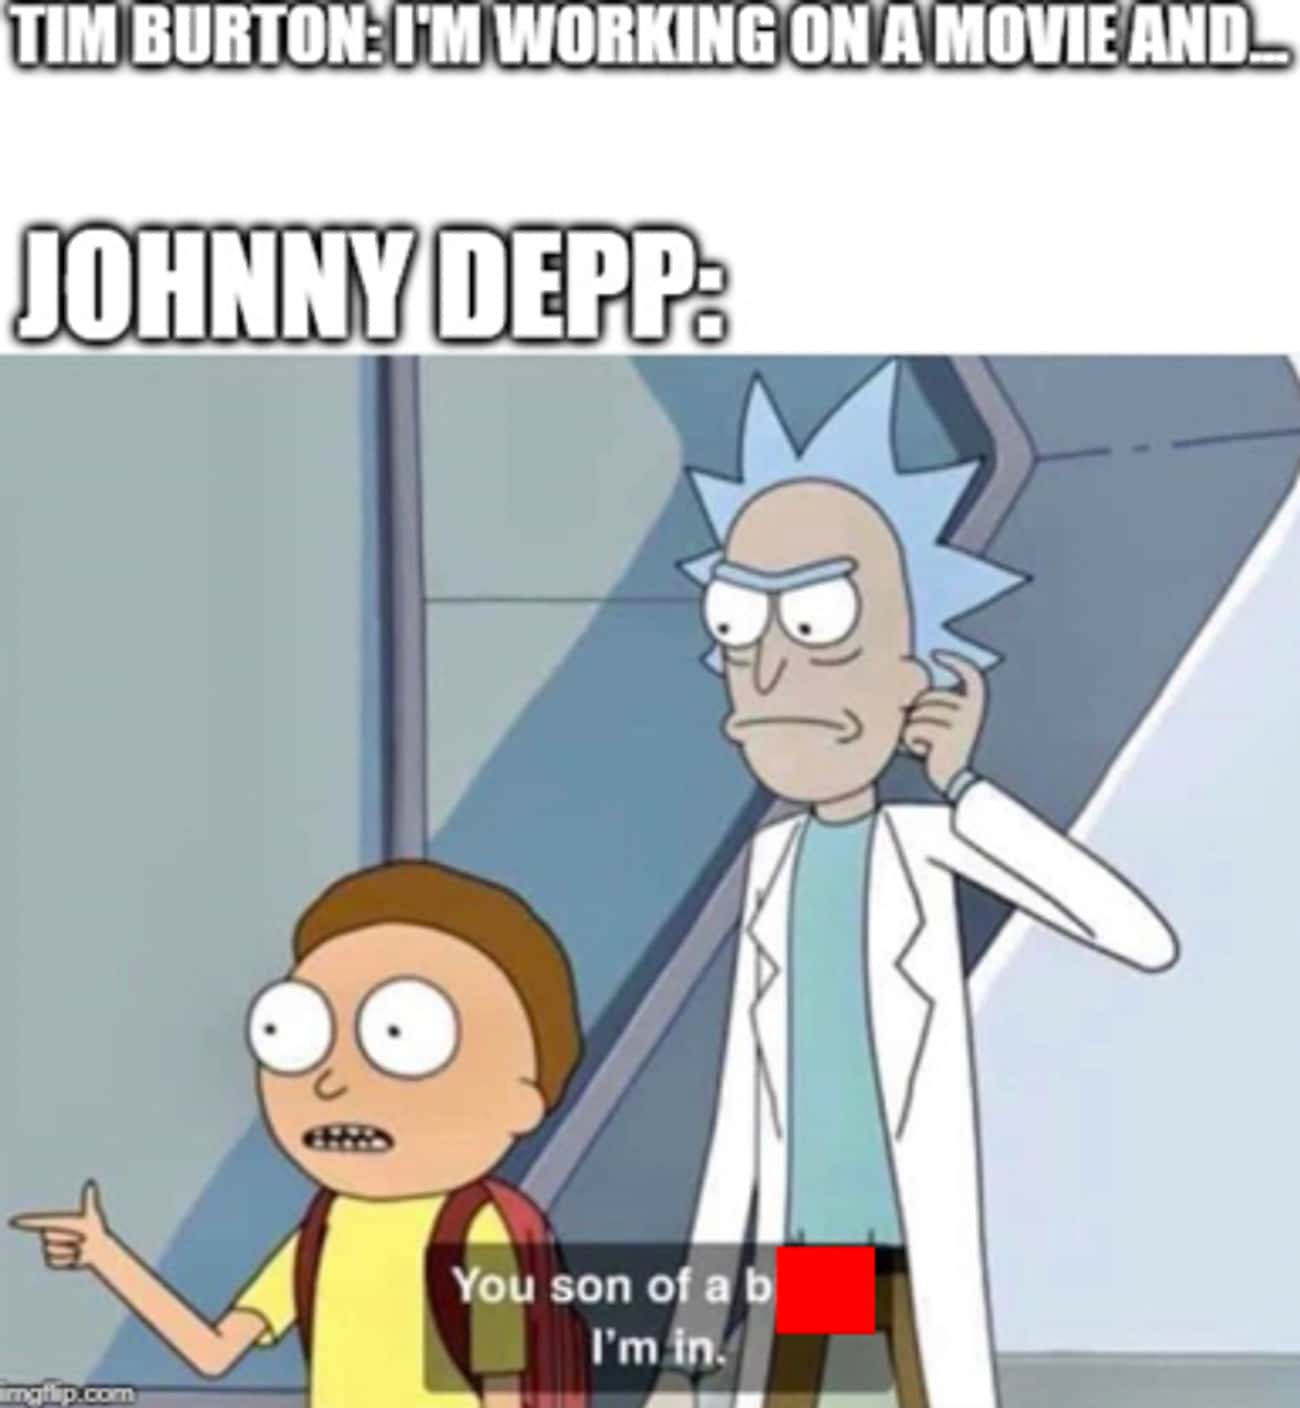 Johnny Depp Memes - rick and morty memes you son - Tim Burton U'M Working On A Movie And. Johnny Depp och You son of a b I'm in. mgtip.com